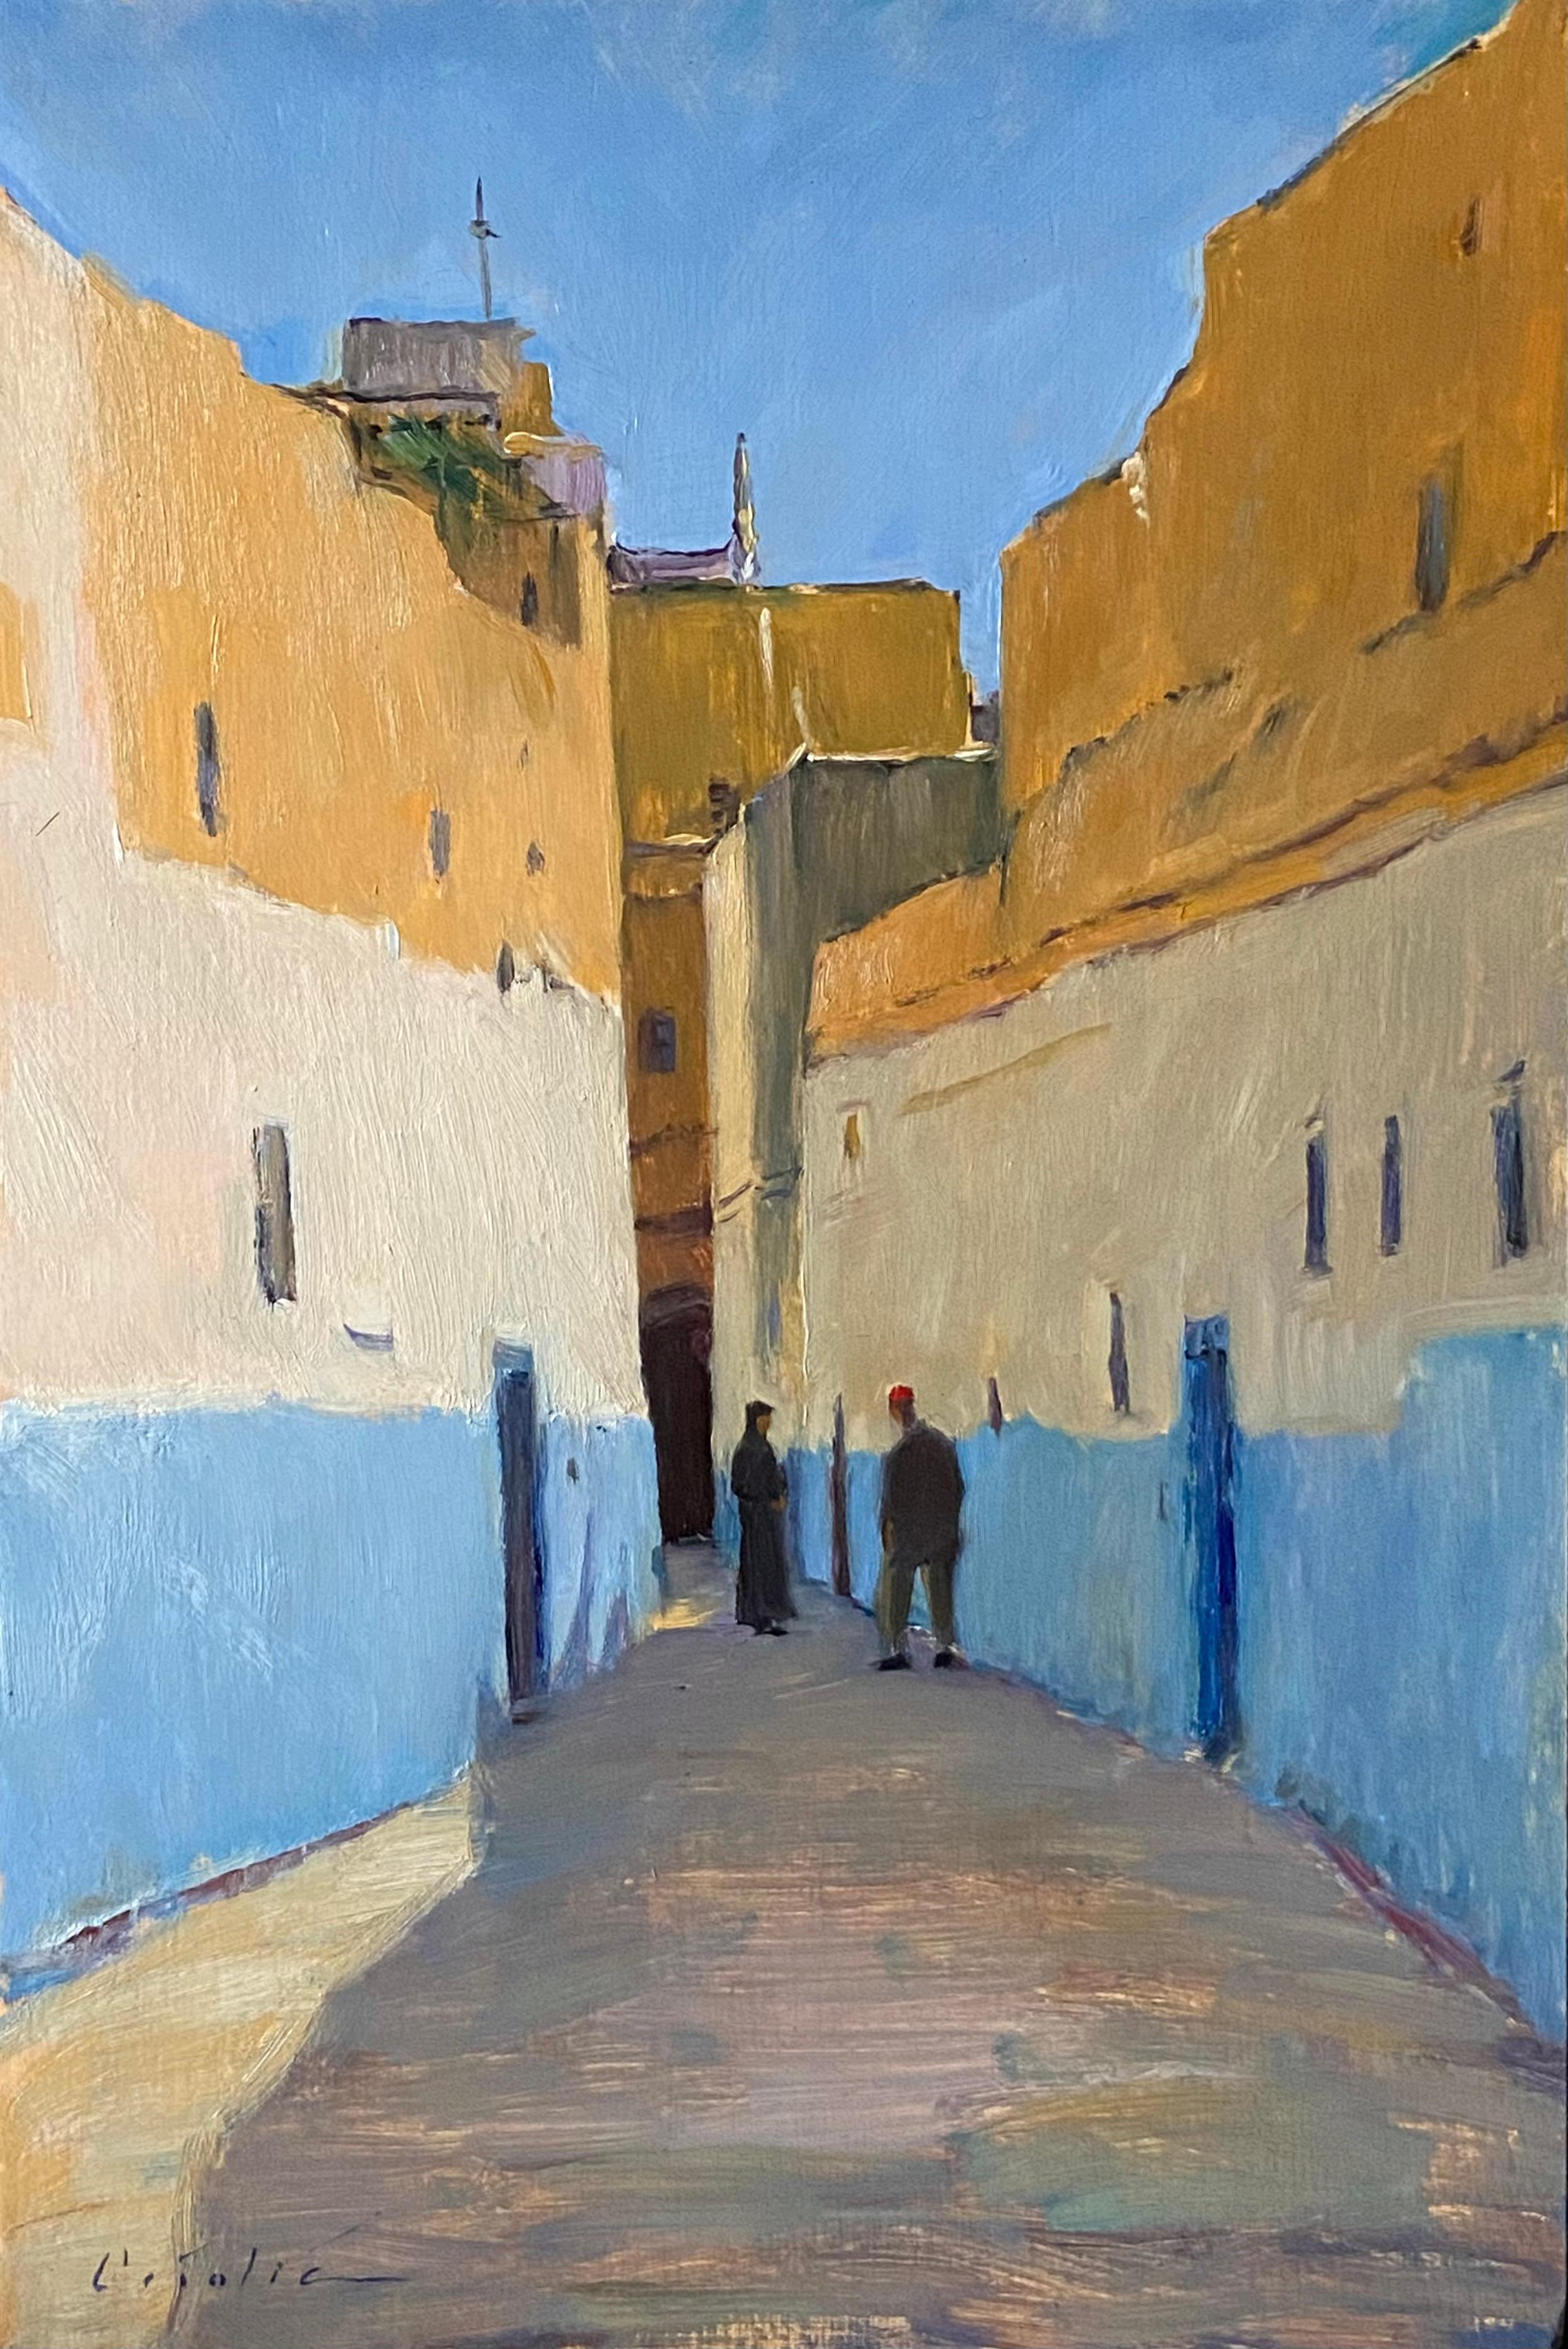 Tina Orsolic Dalessio Landscape Painting - "In the Kazbah, Fes" contemporary plein air oil painting, Morocco